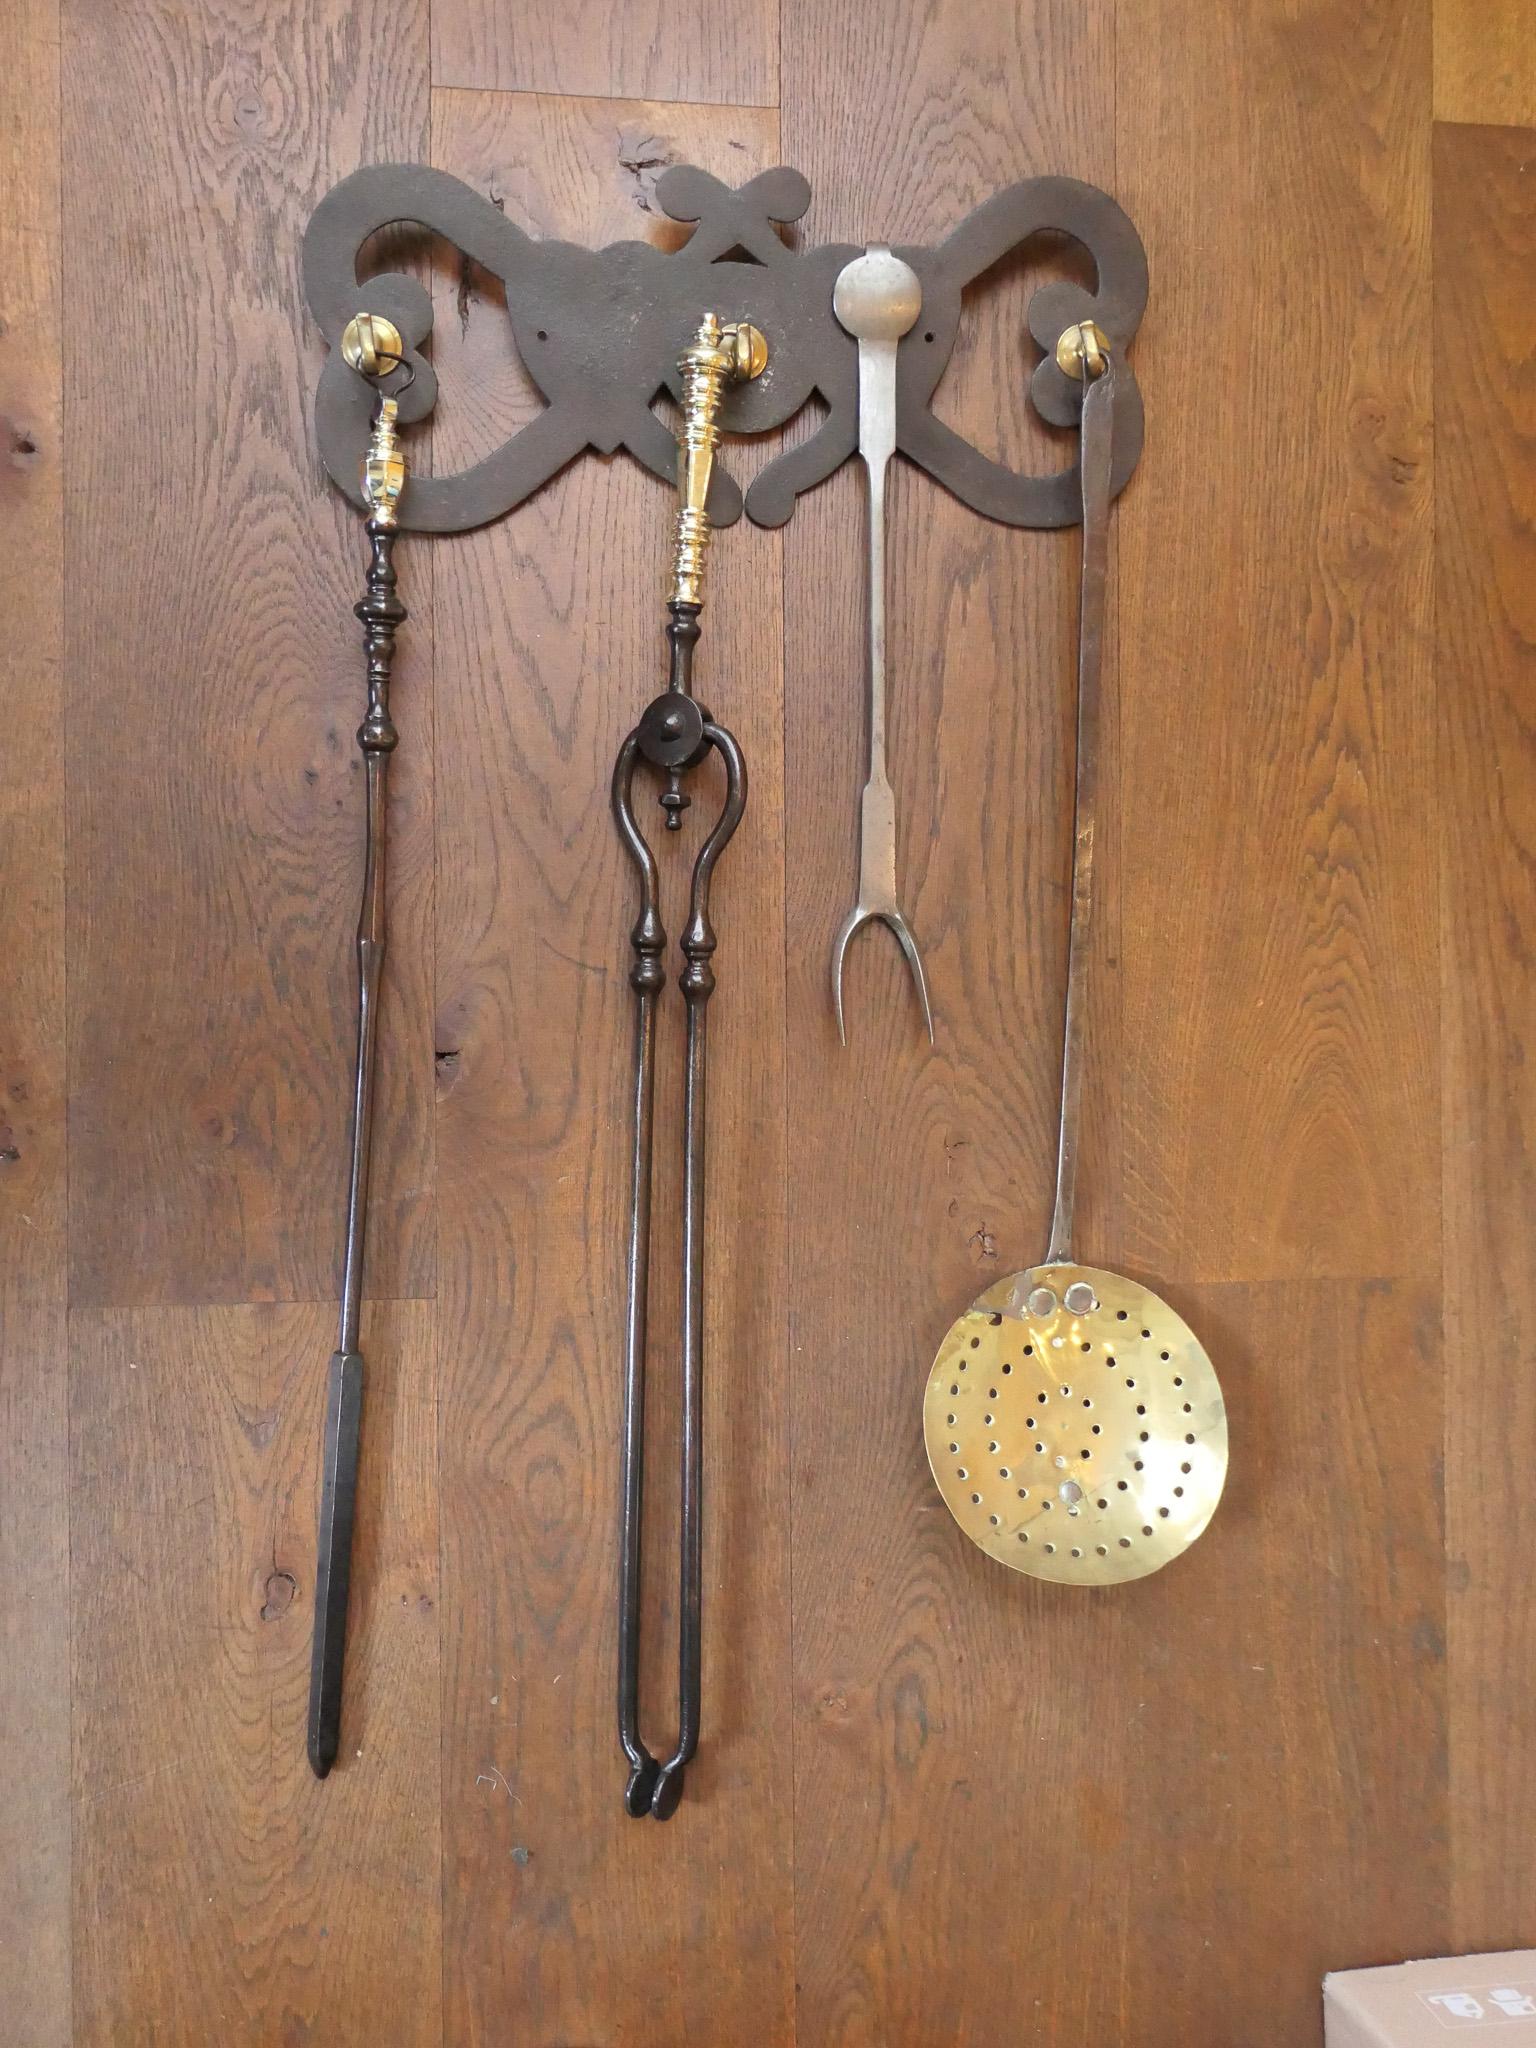 18th - 19th century Dutch neoclassical fireplace tool set consisting of a fireplace tongs, fire poker, a tasting fork and a skimmer and a hanger. The set is also made of wrought iron and some brass. They are in a good condition and are fully